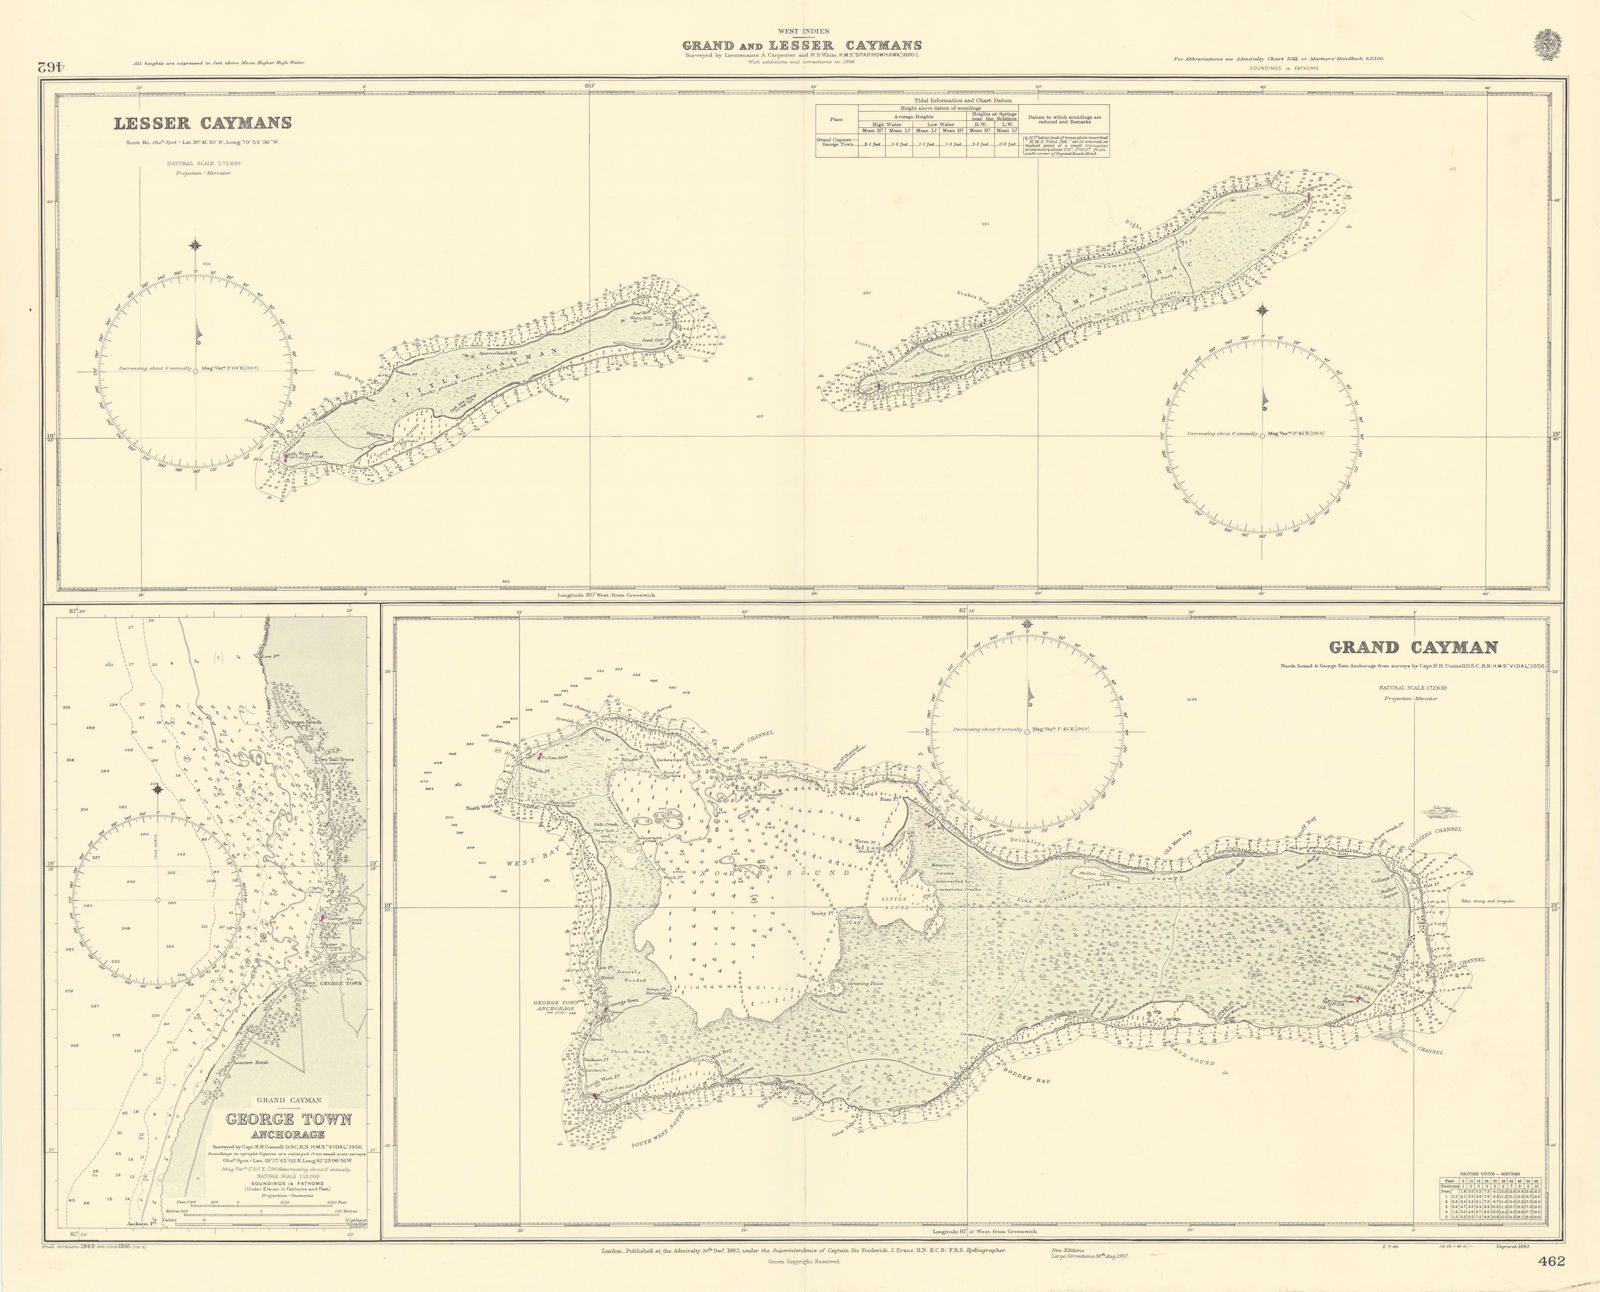 Cayman Islands Lesser Grand Caymans George Town ADMIRALTY chart 1882 (1966) map